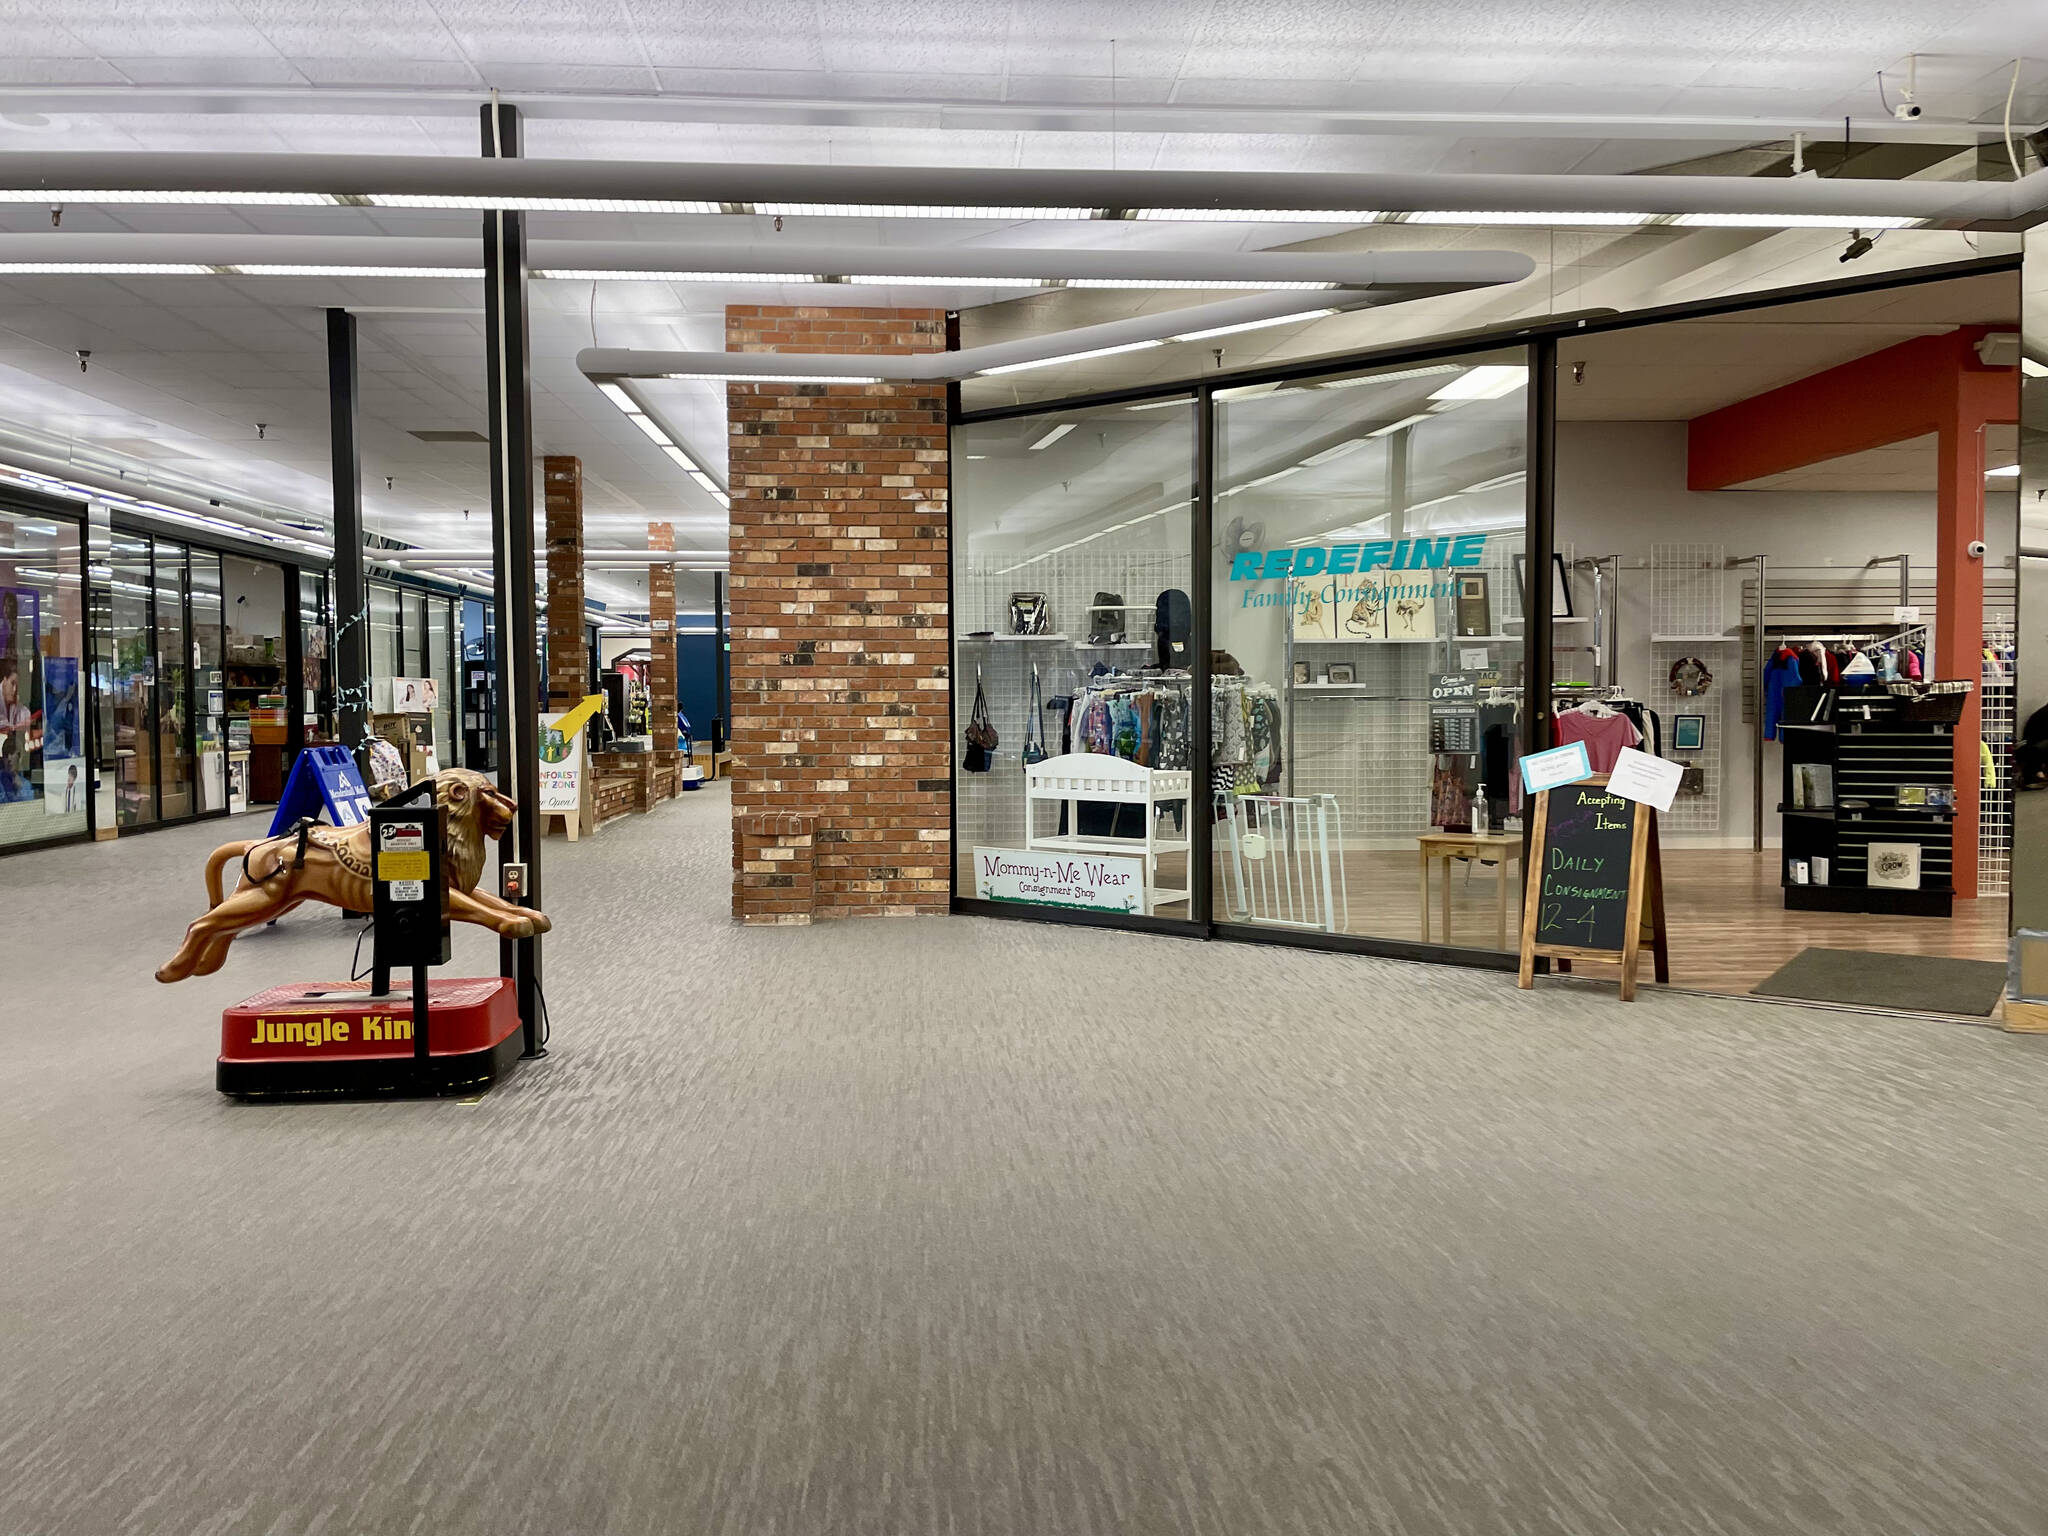 Mendenhall Mall is home to multiple businesses operated by women and people of color, including the Indigenous-owned Redefine consignment shop. (Lauren Cusimano / For the Capital City Weekly)